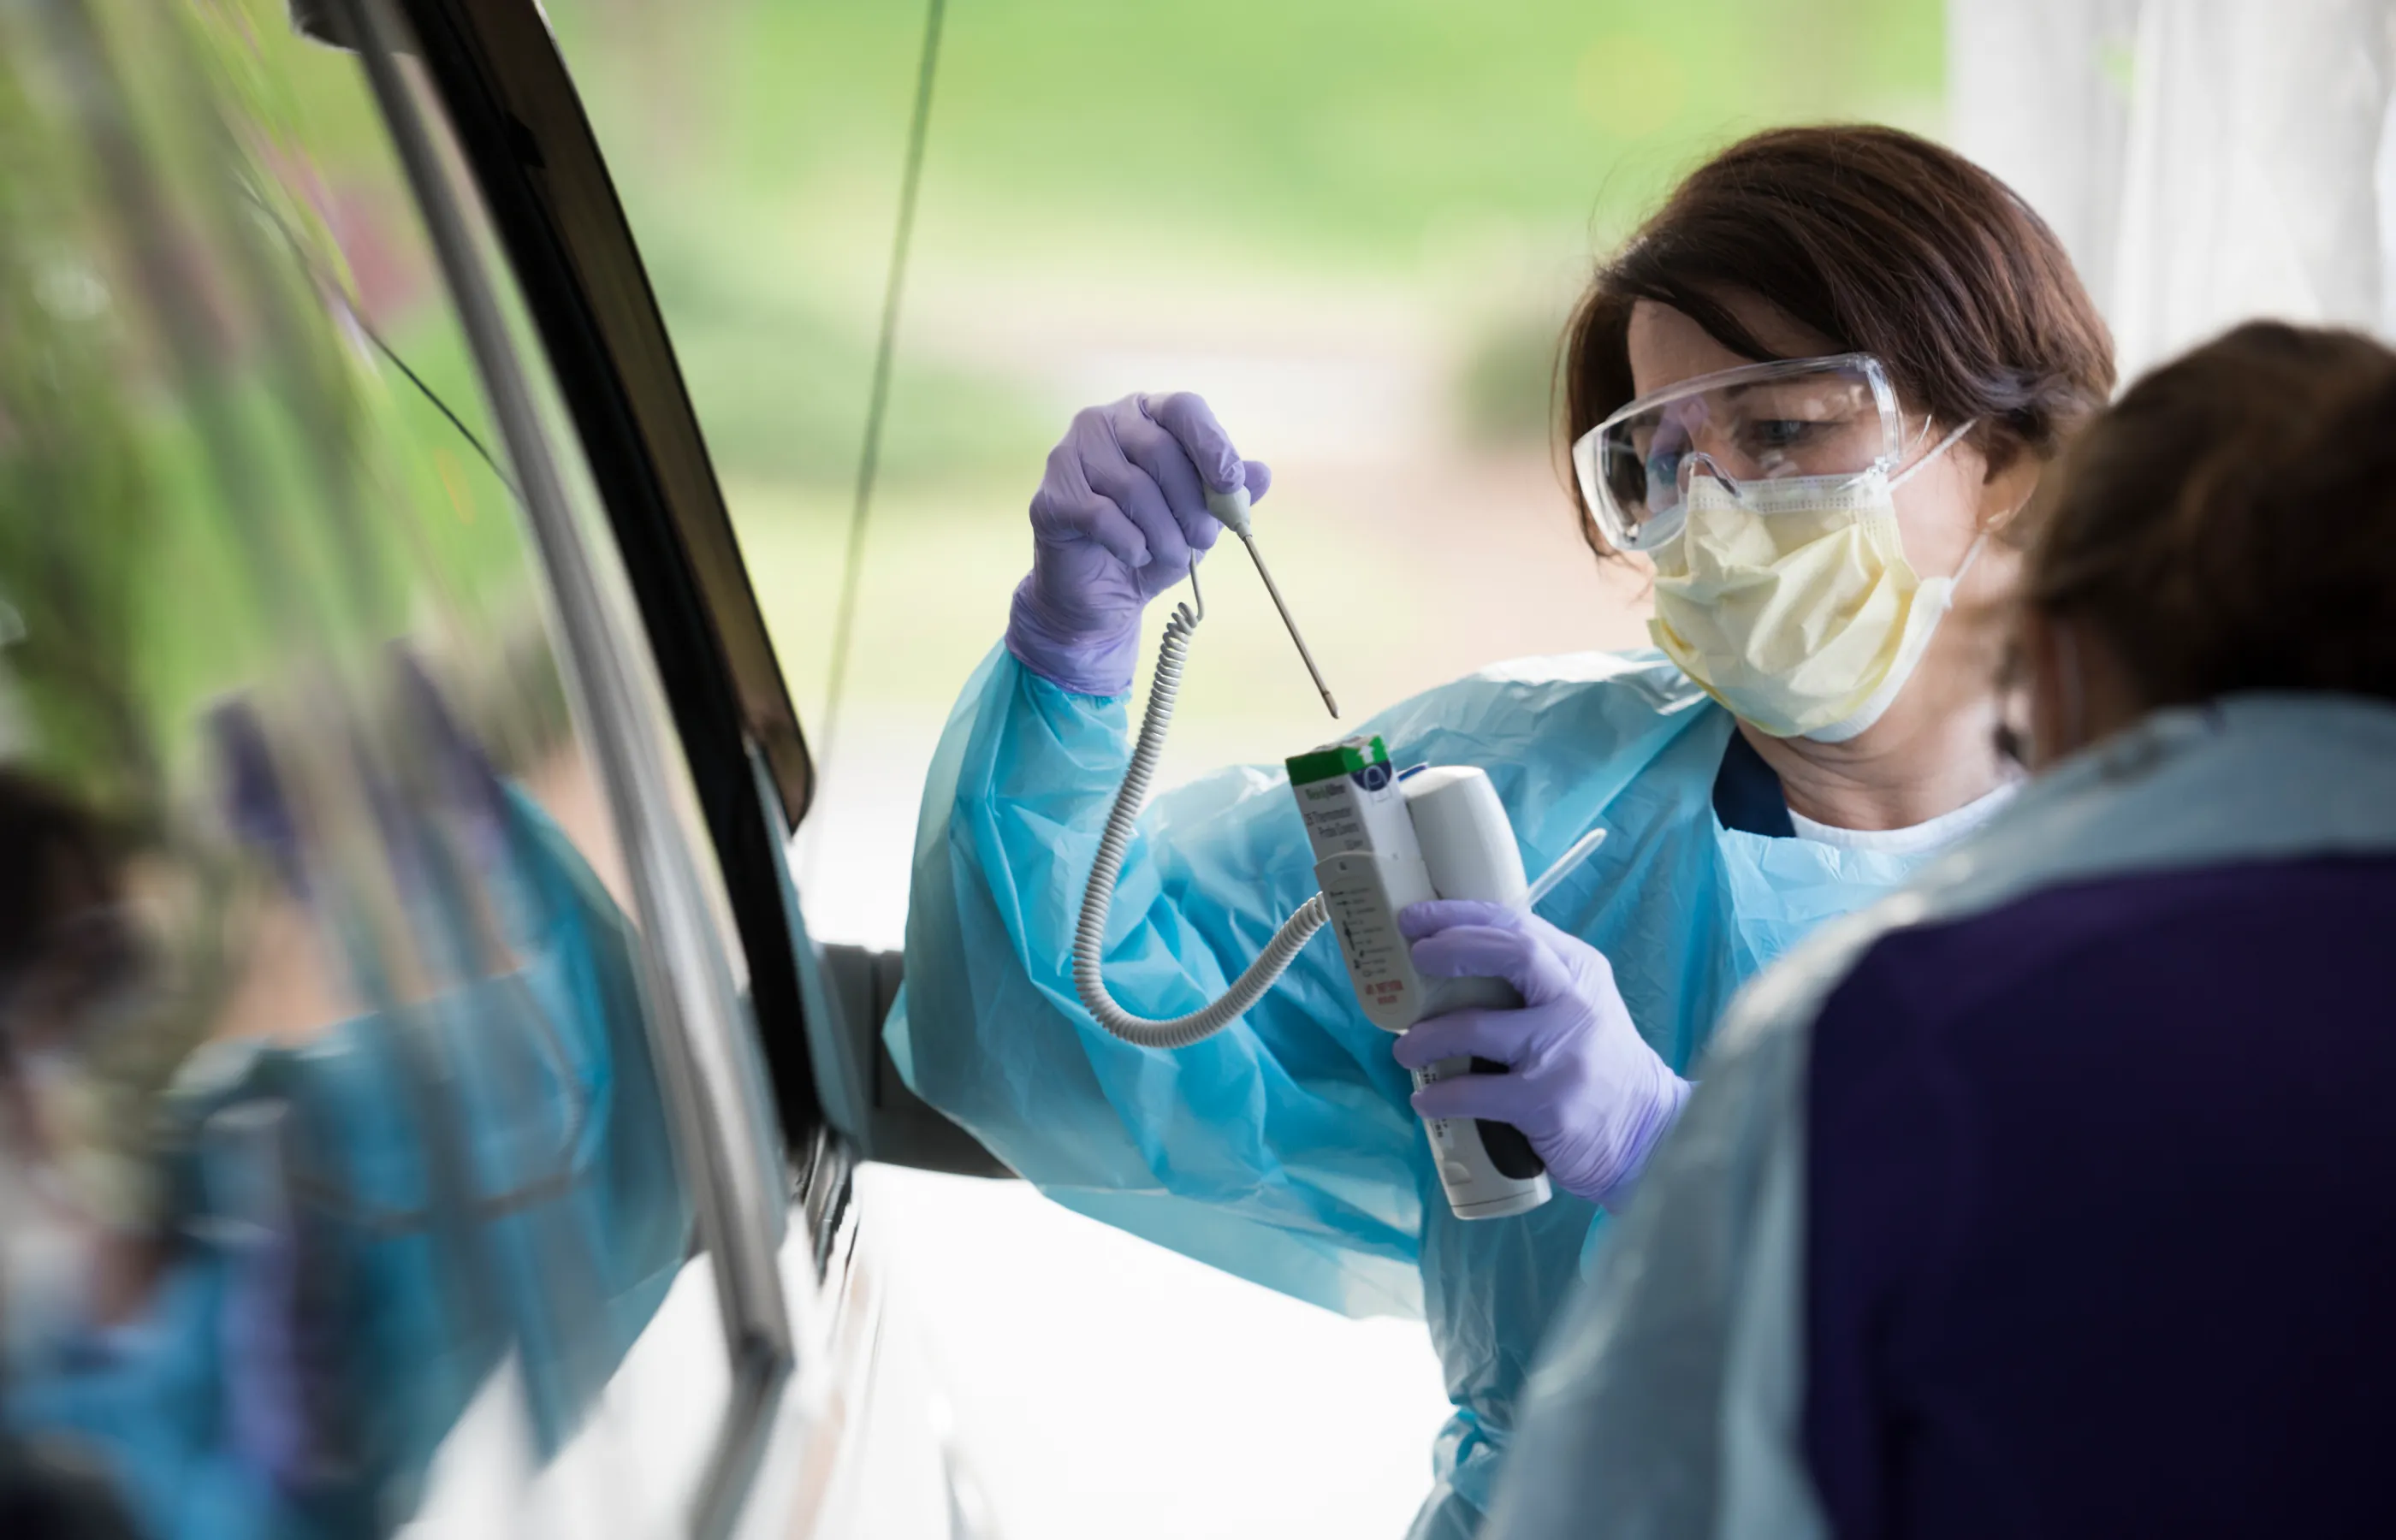 A team member wearing a mask, protective eyewear and gown looks at a thermometer next to a patient's car